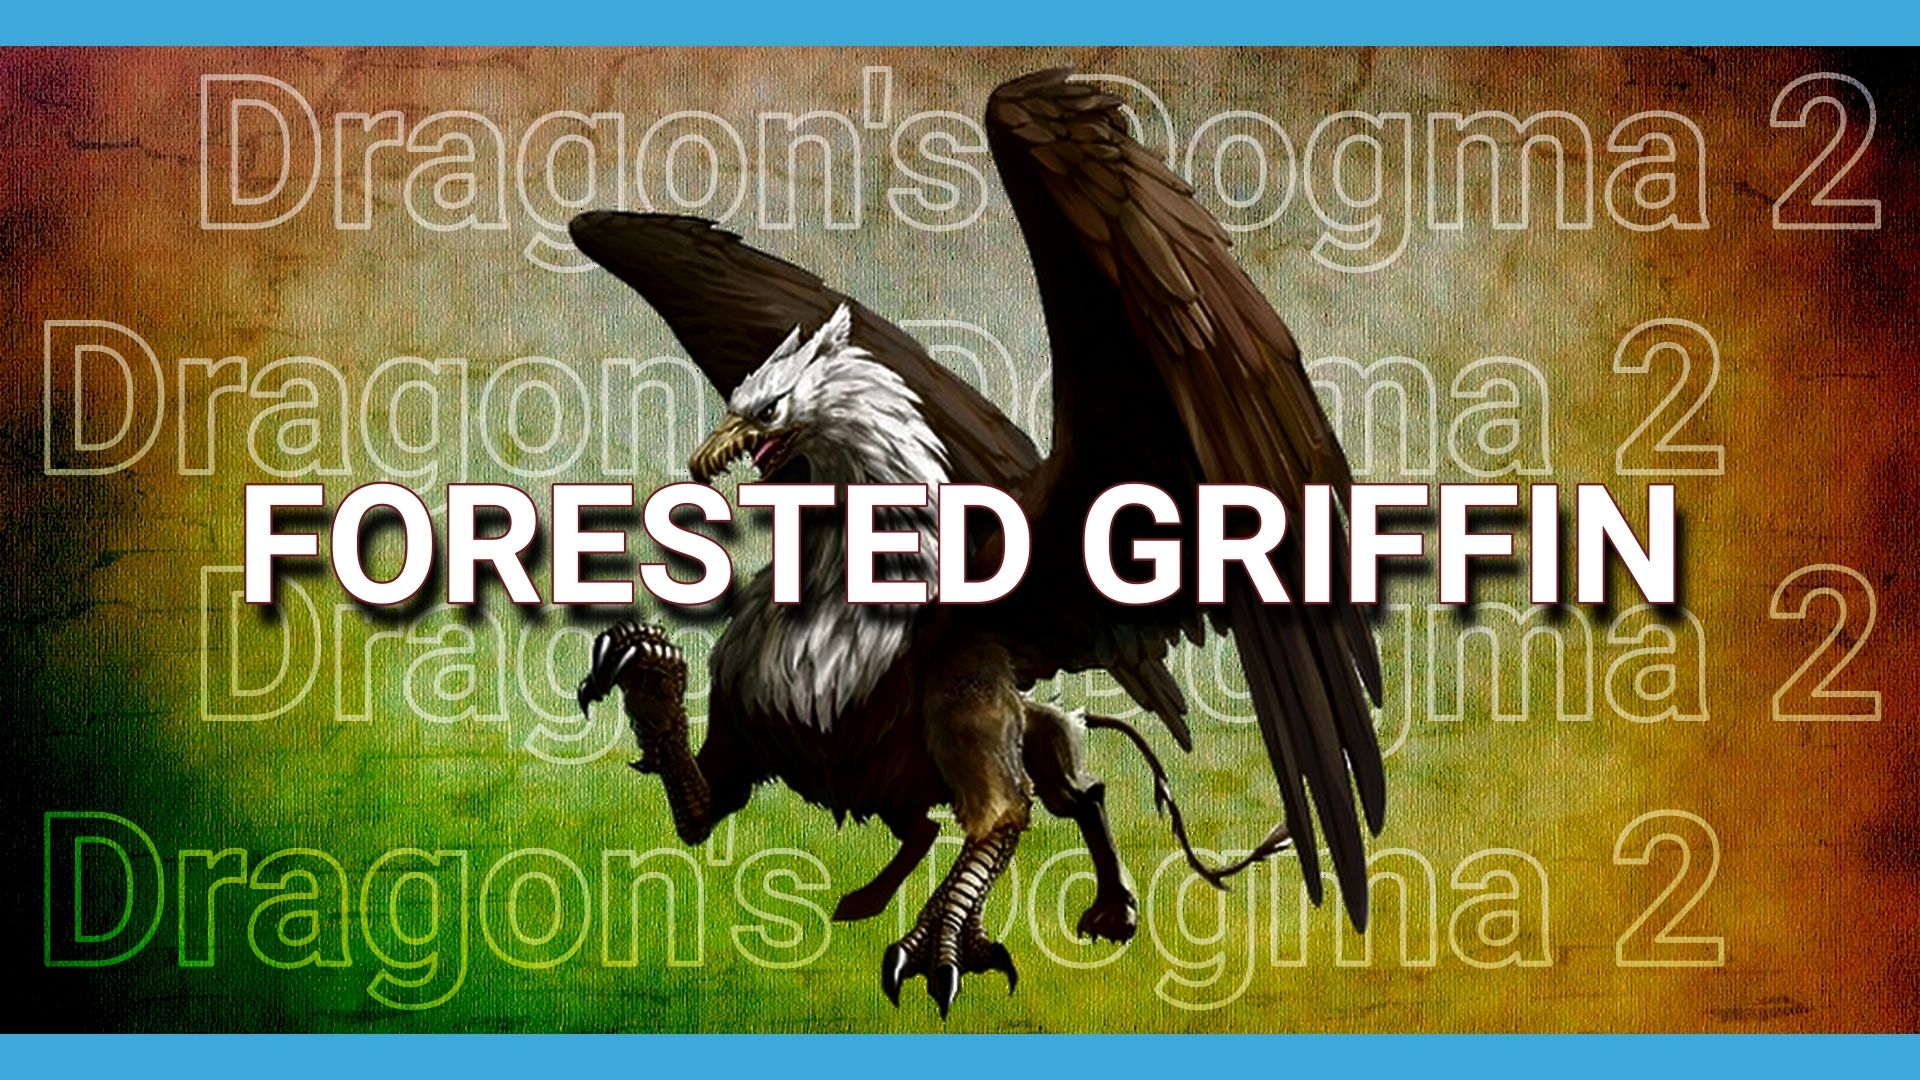 Dragon's Dogma 2 Forested Griffin Nest video thumbnail